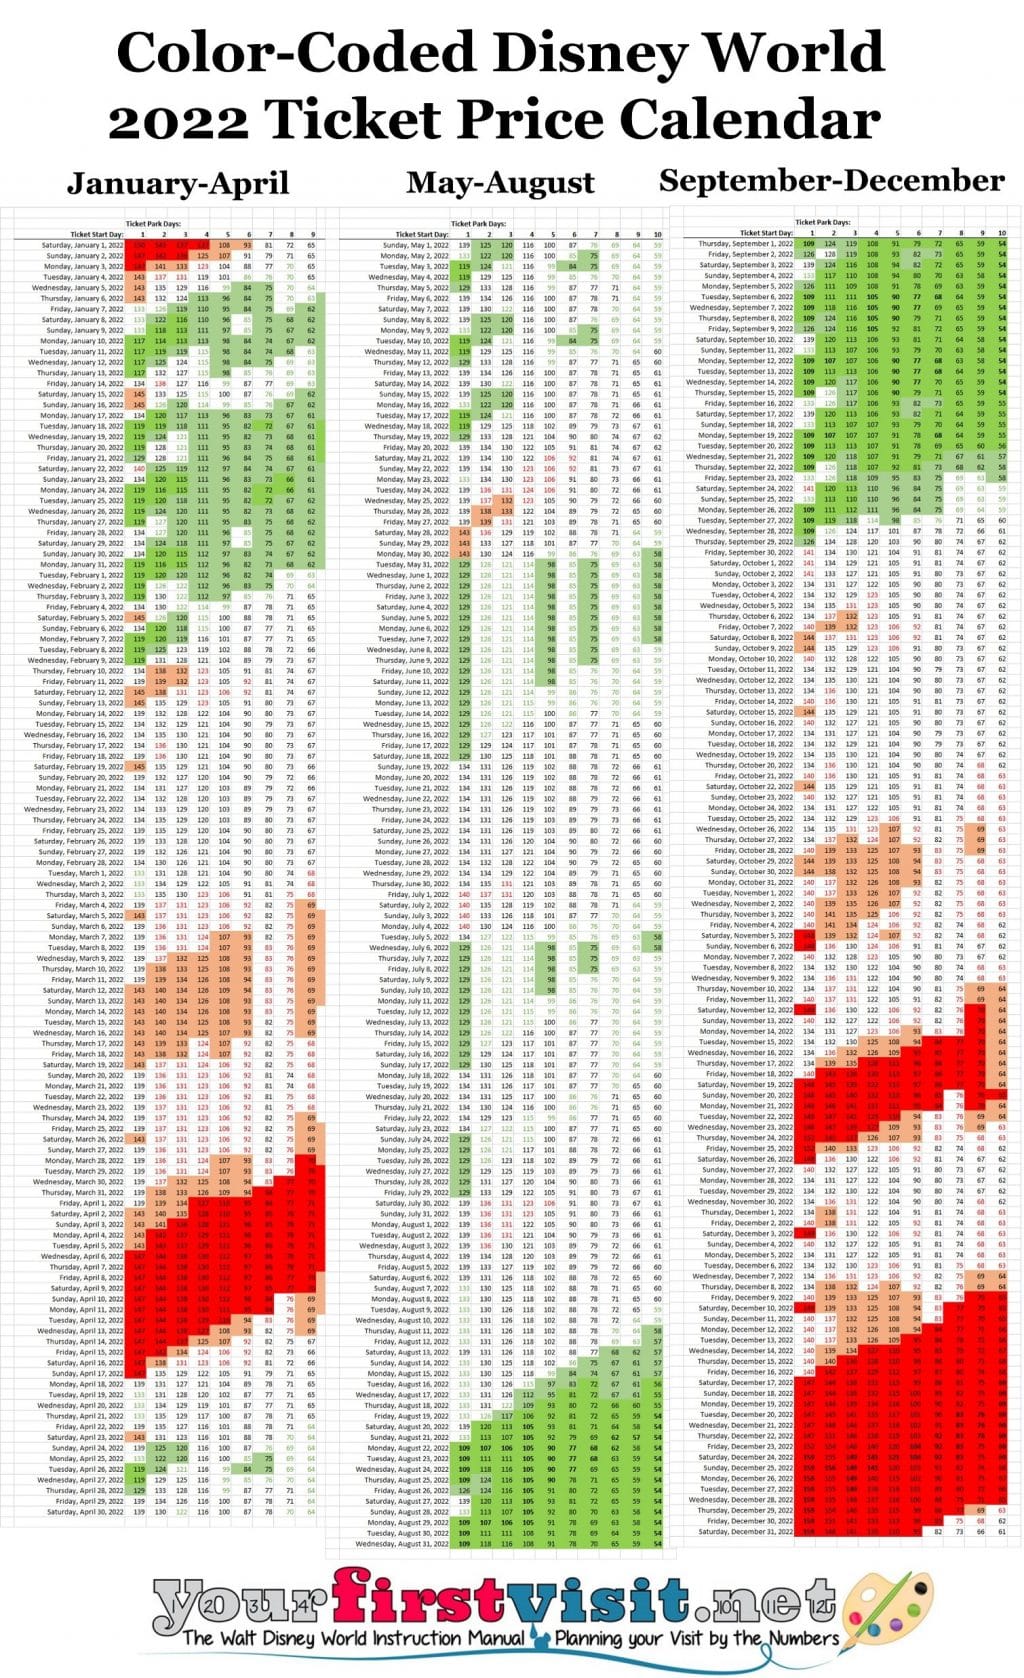 Easywdw Crowd Calendar 2022 Disney World 2022 Ticket Prices In A Color-Coded Calendar -  Yourfirstvisit.net